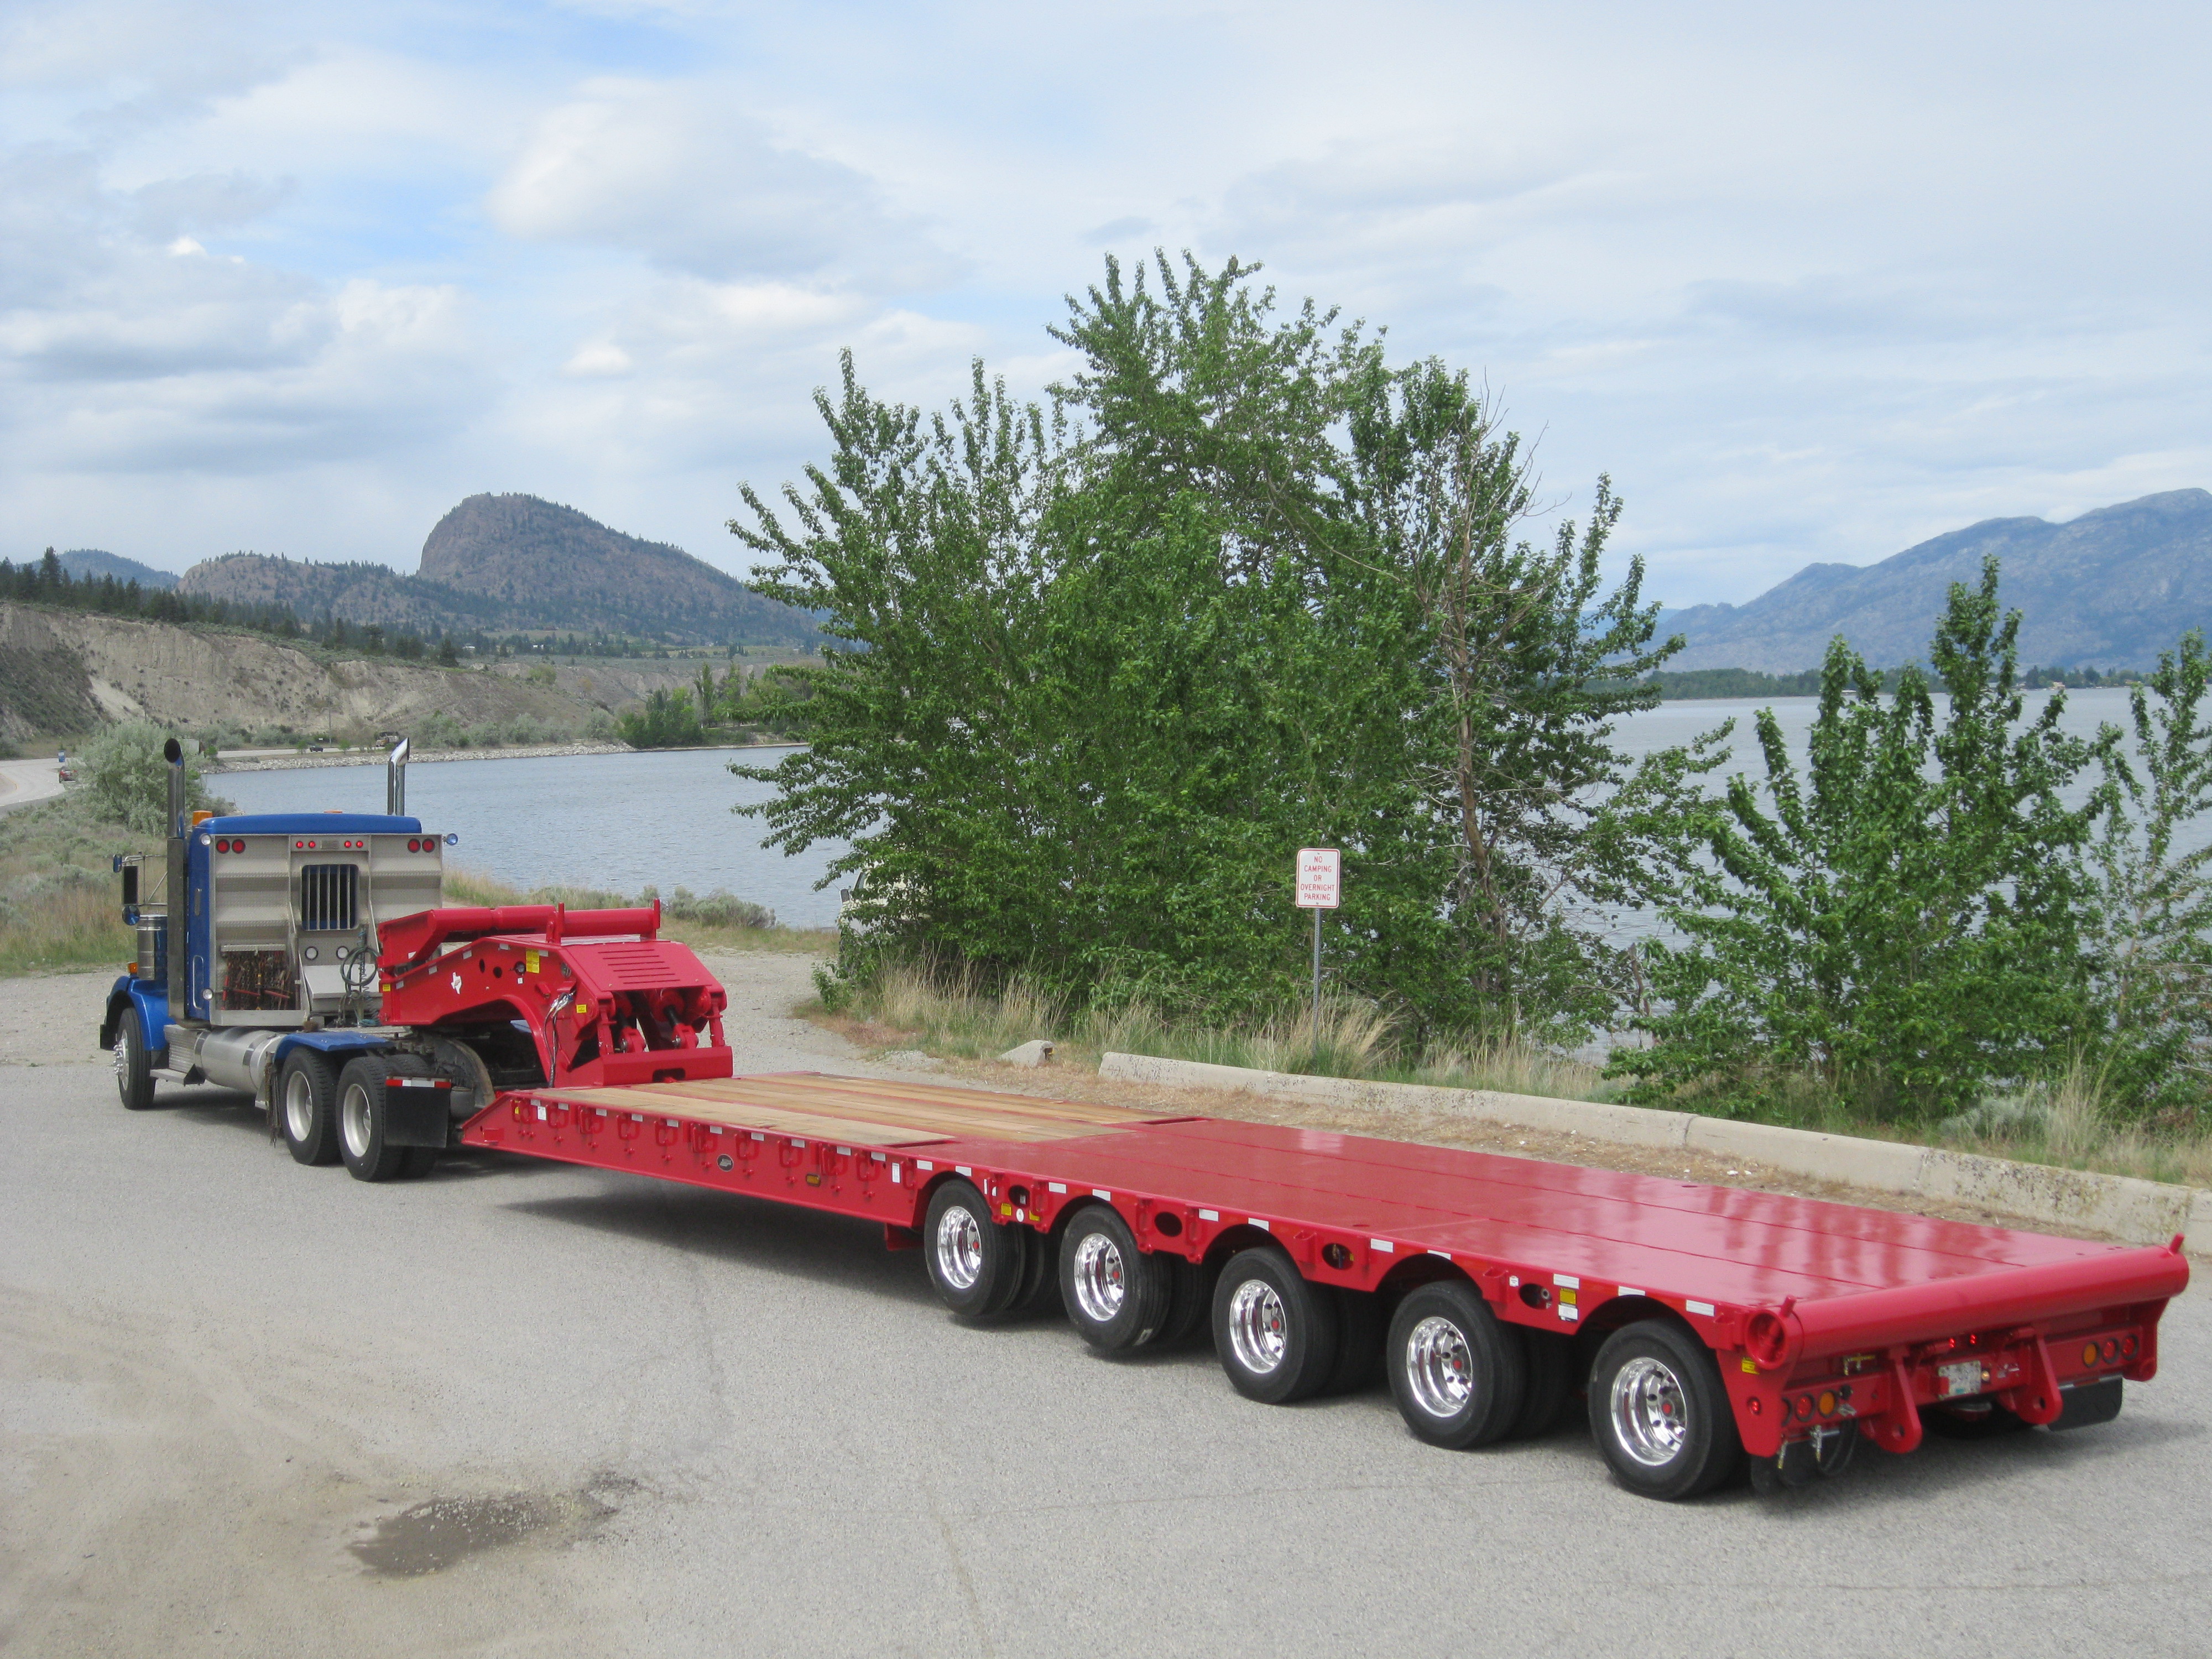 Oilfield Lowbed Trailers Images